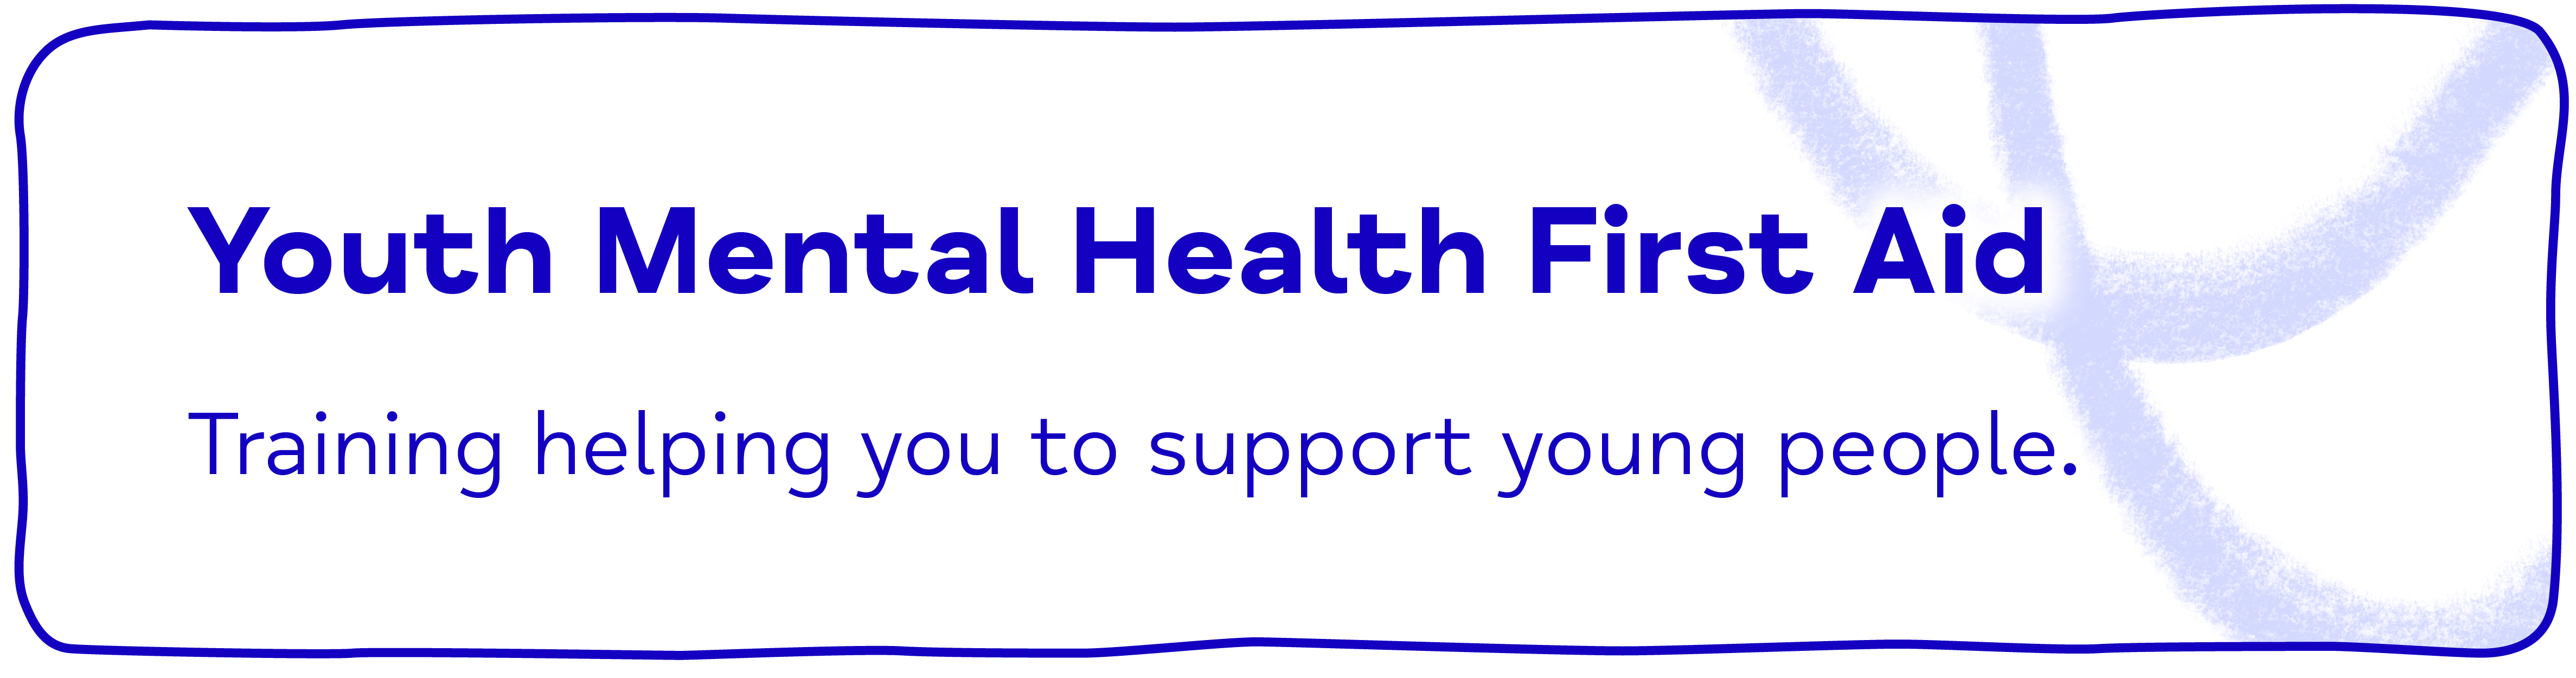 Youth Mental Health First Aid. Training helping you to support young people.